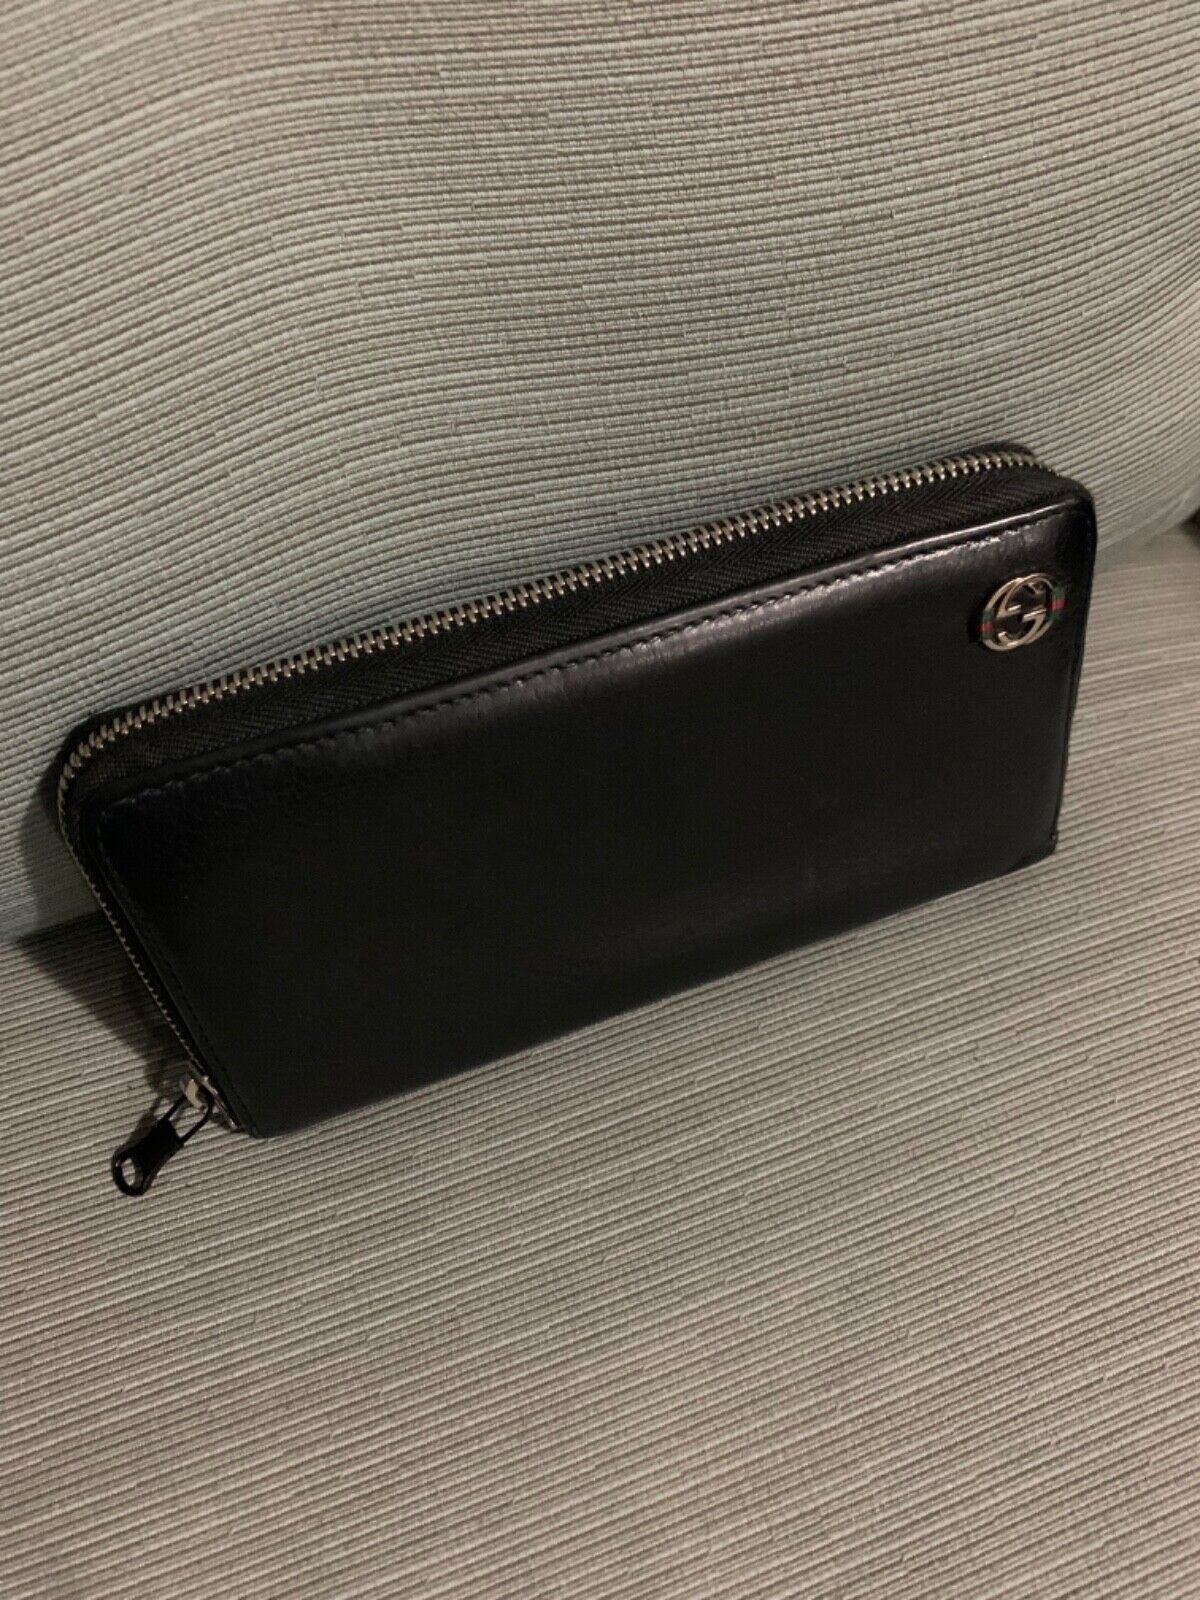 Authentic Gucci Black Leather Zippy Zip Around Long Wallet